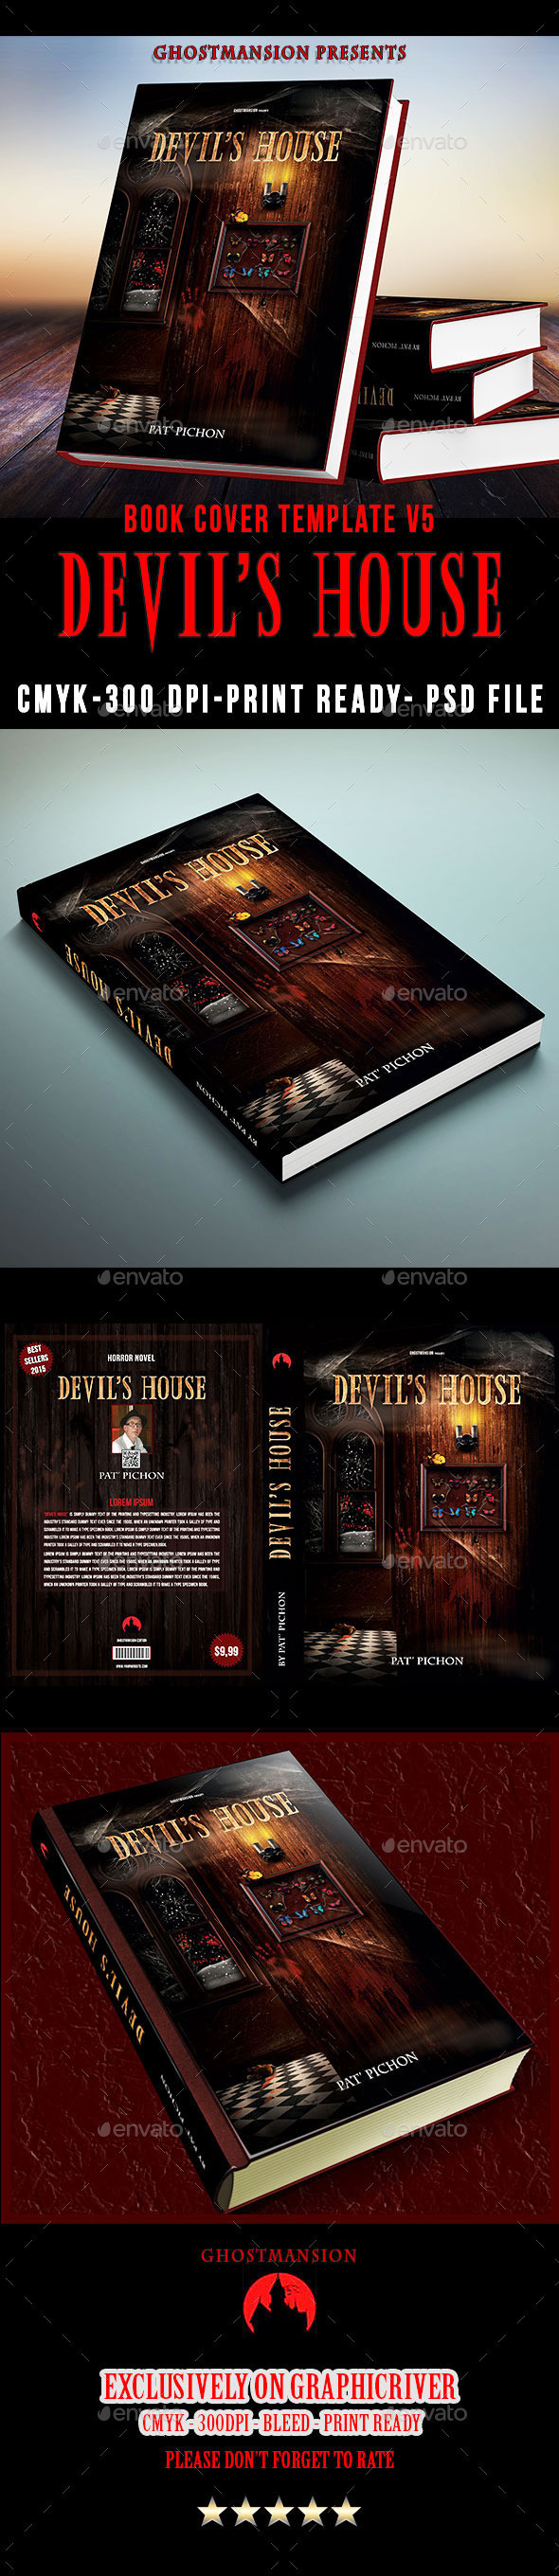 Preview book 20cover 20template 20v5 20devils 20house